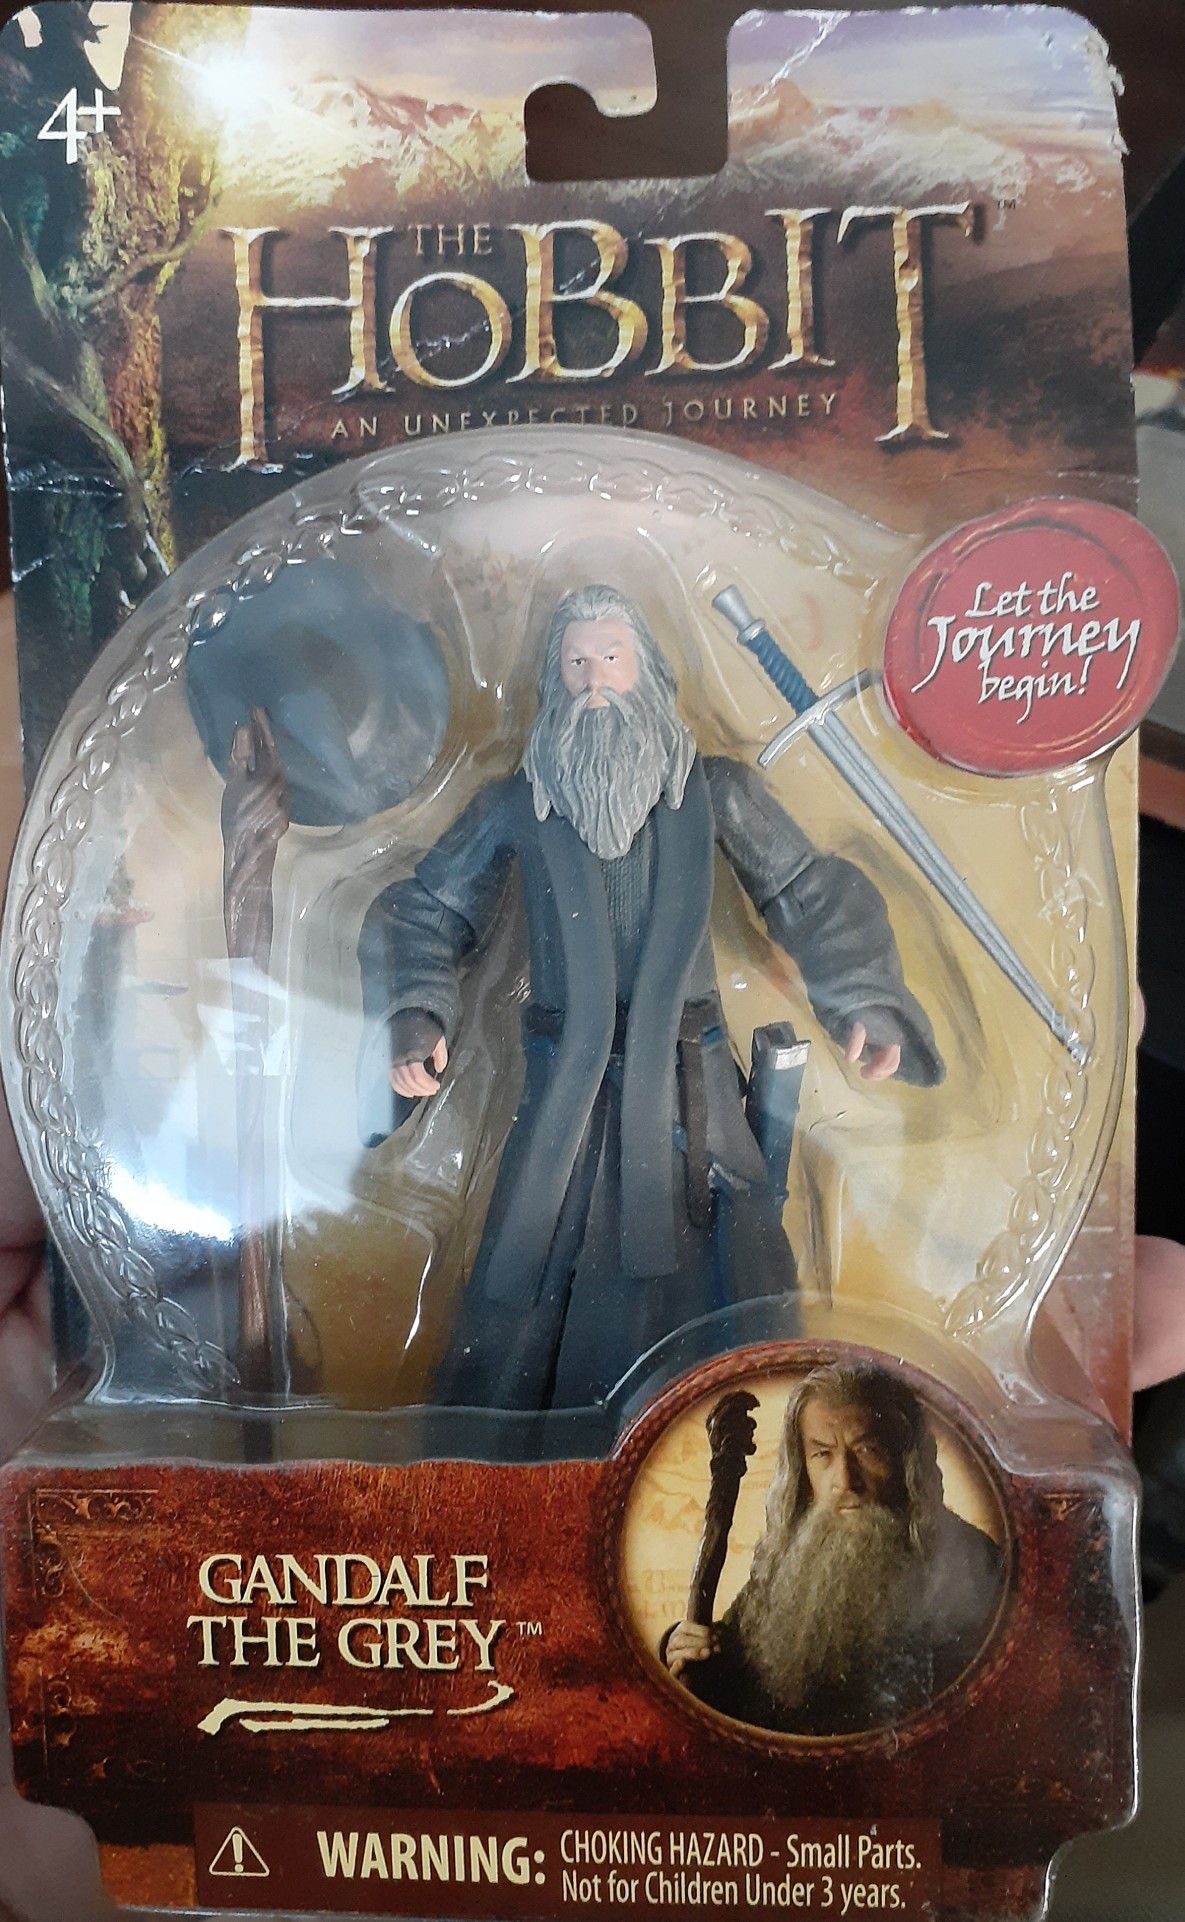 The Hobbit collectable Gandalf the Grey